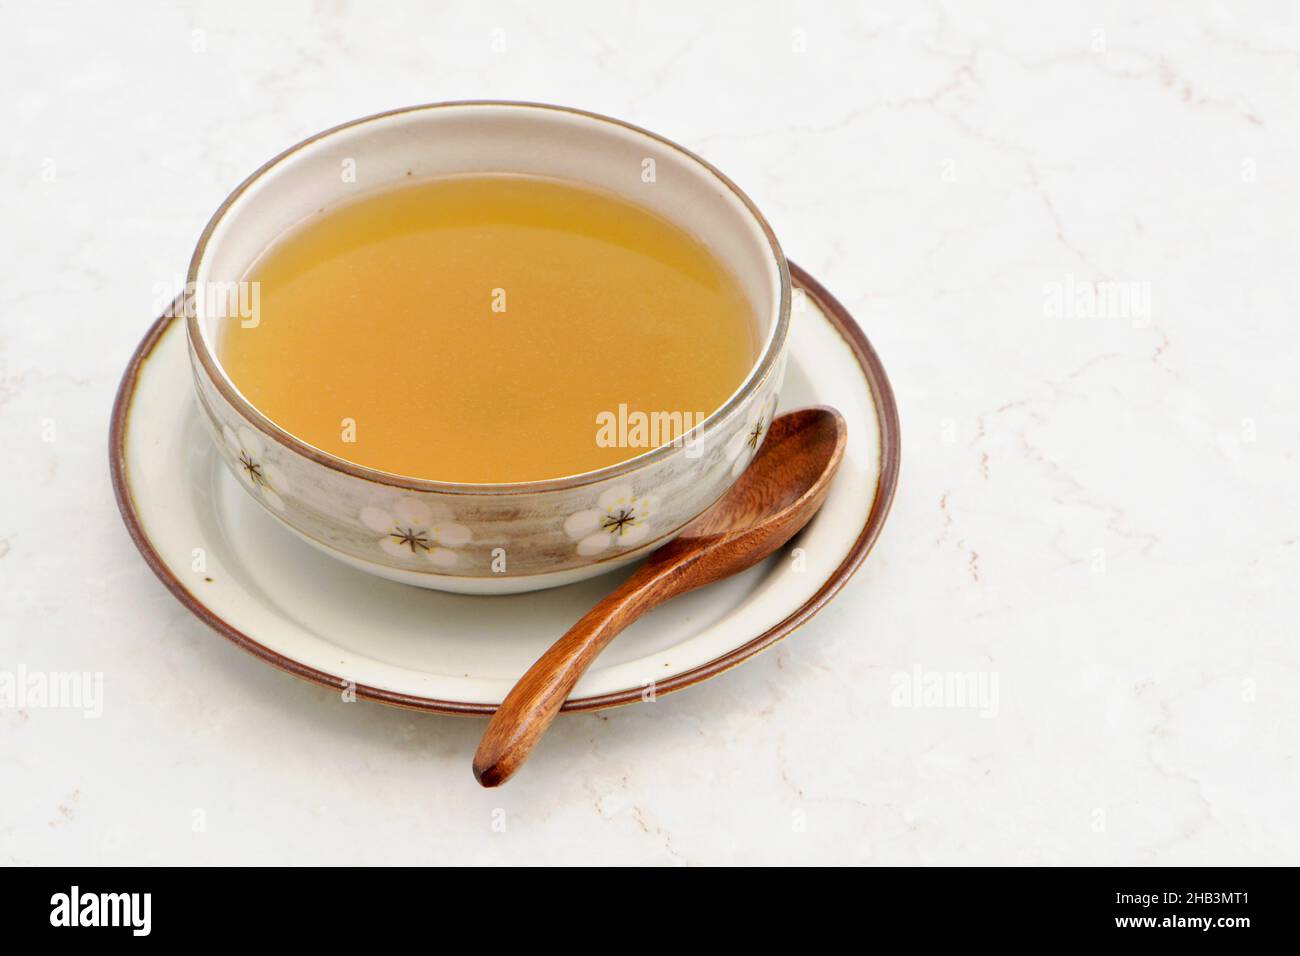 Clear chicken broth soup in pretty chinese bowl with carved wooden spoon on rustic plate. Neutral background with room for text. Horizontal format. Stock Photo